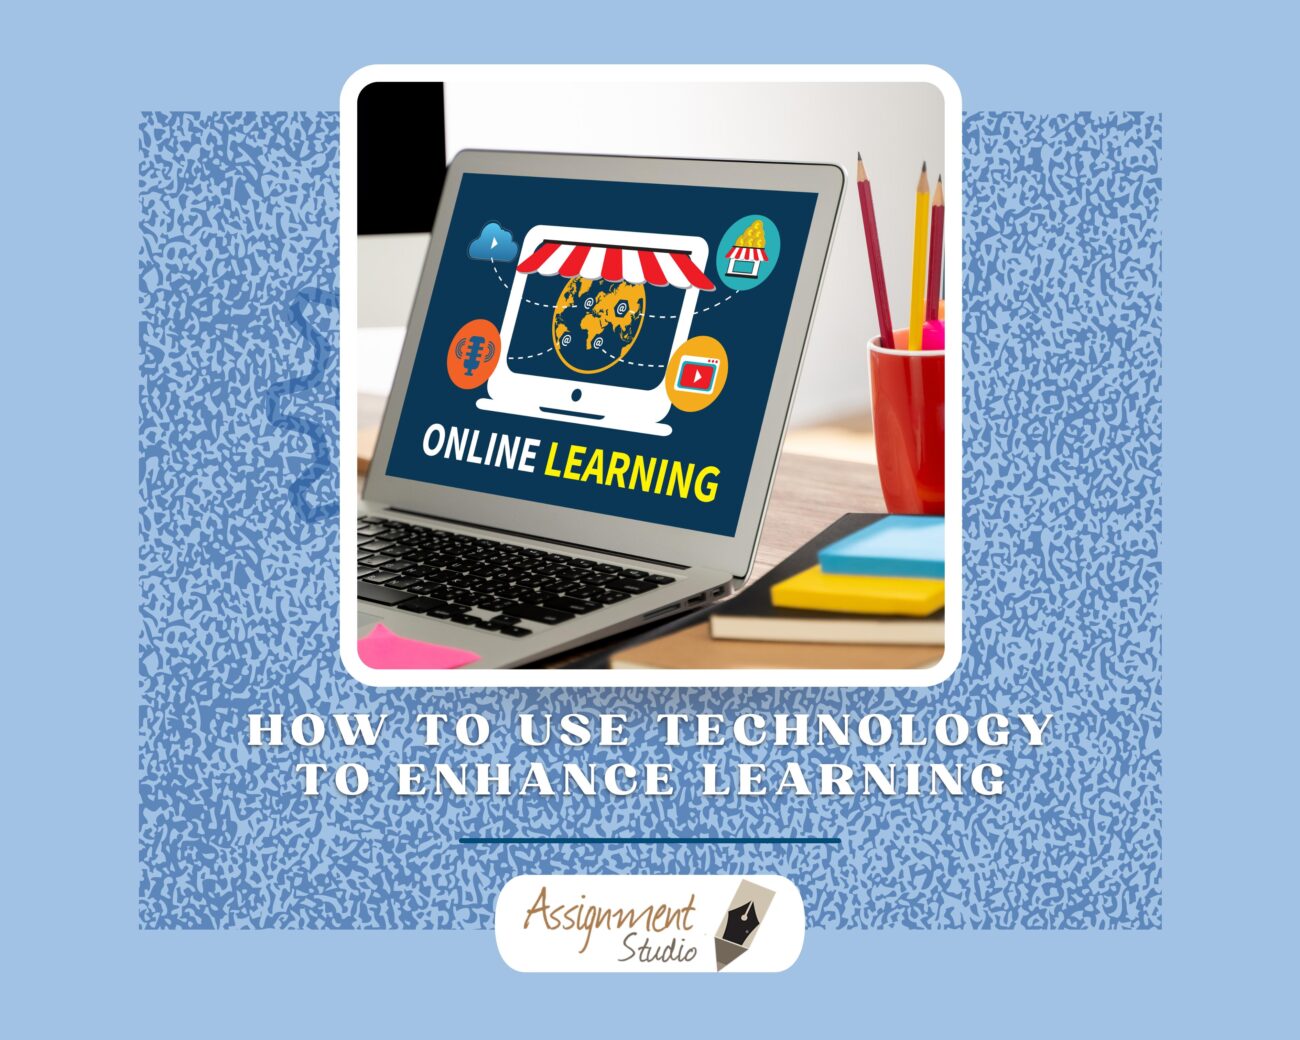 How to Use Technology to Enhance Learning